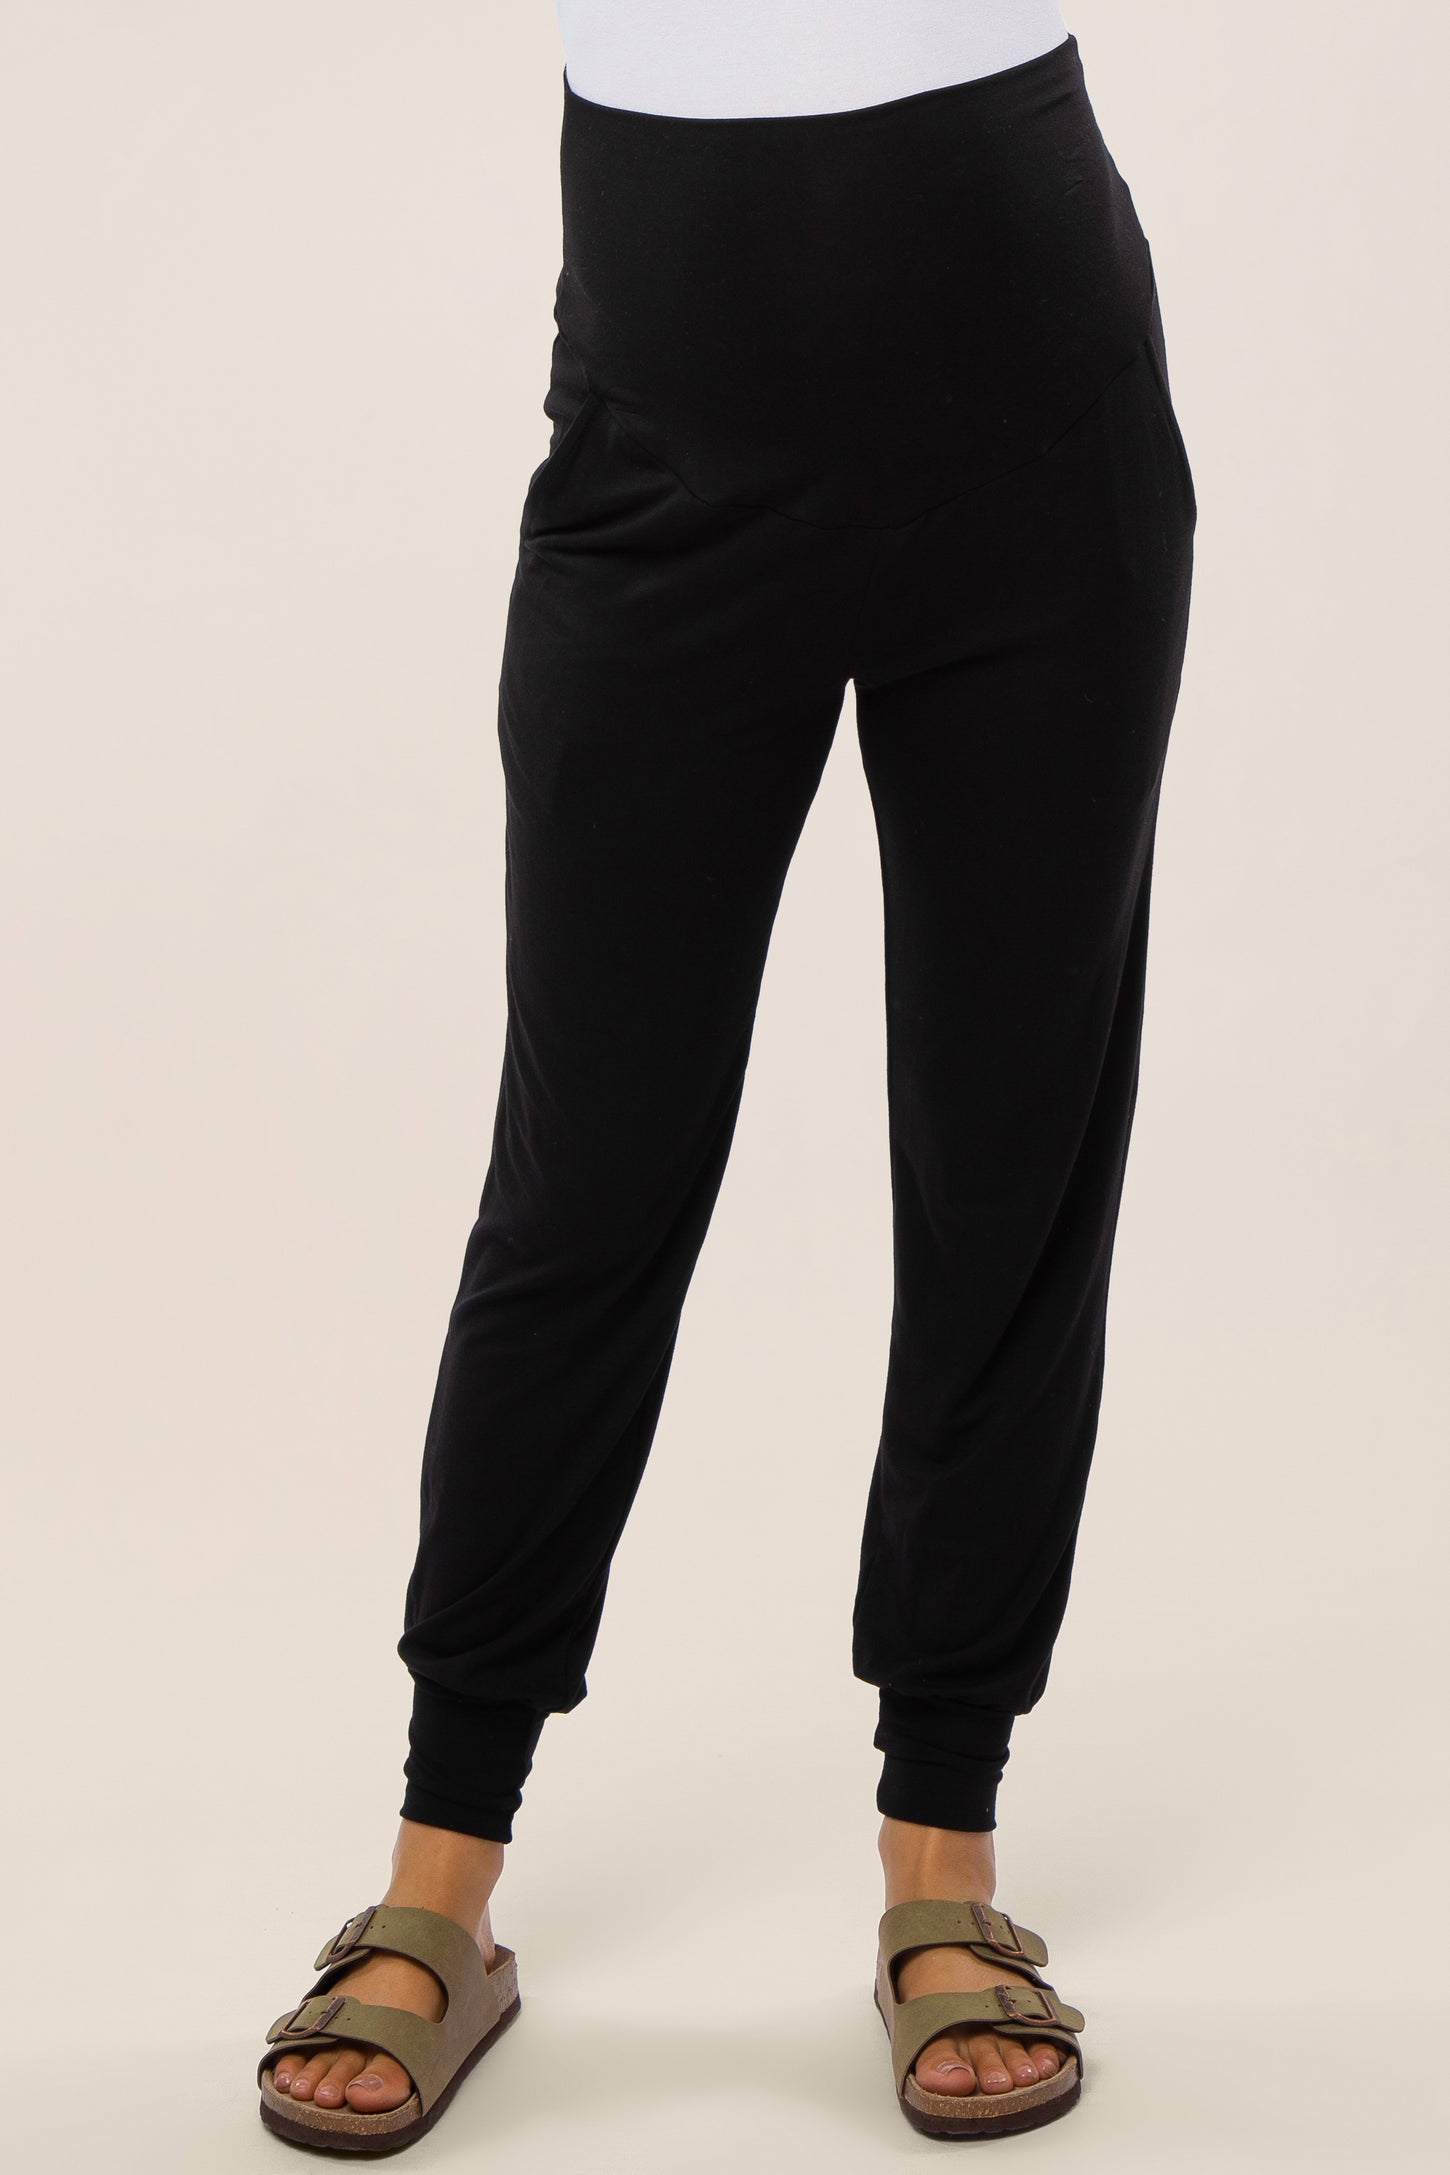 Stay Active and Stylish with the Olive Salutation Jogger